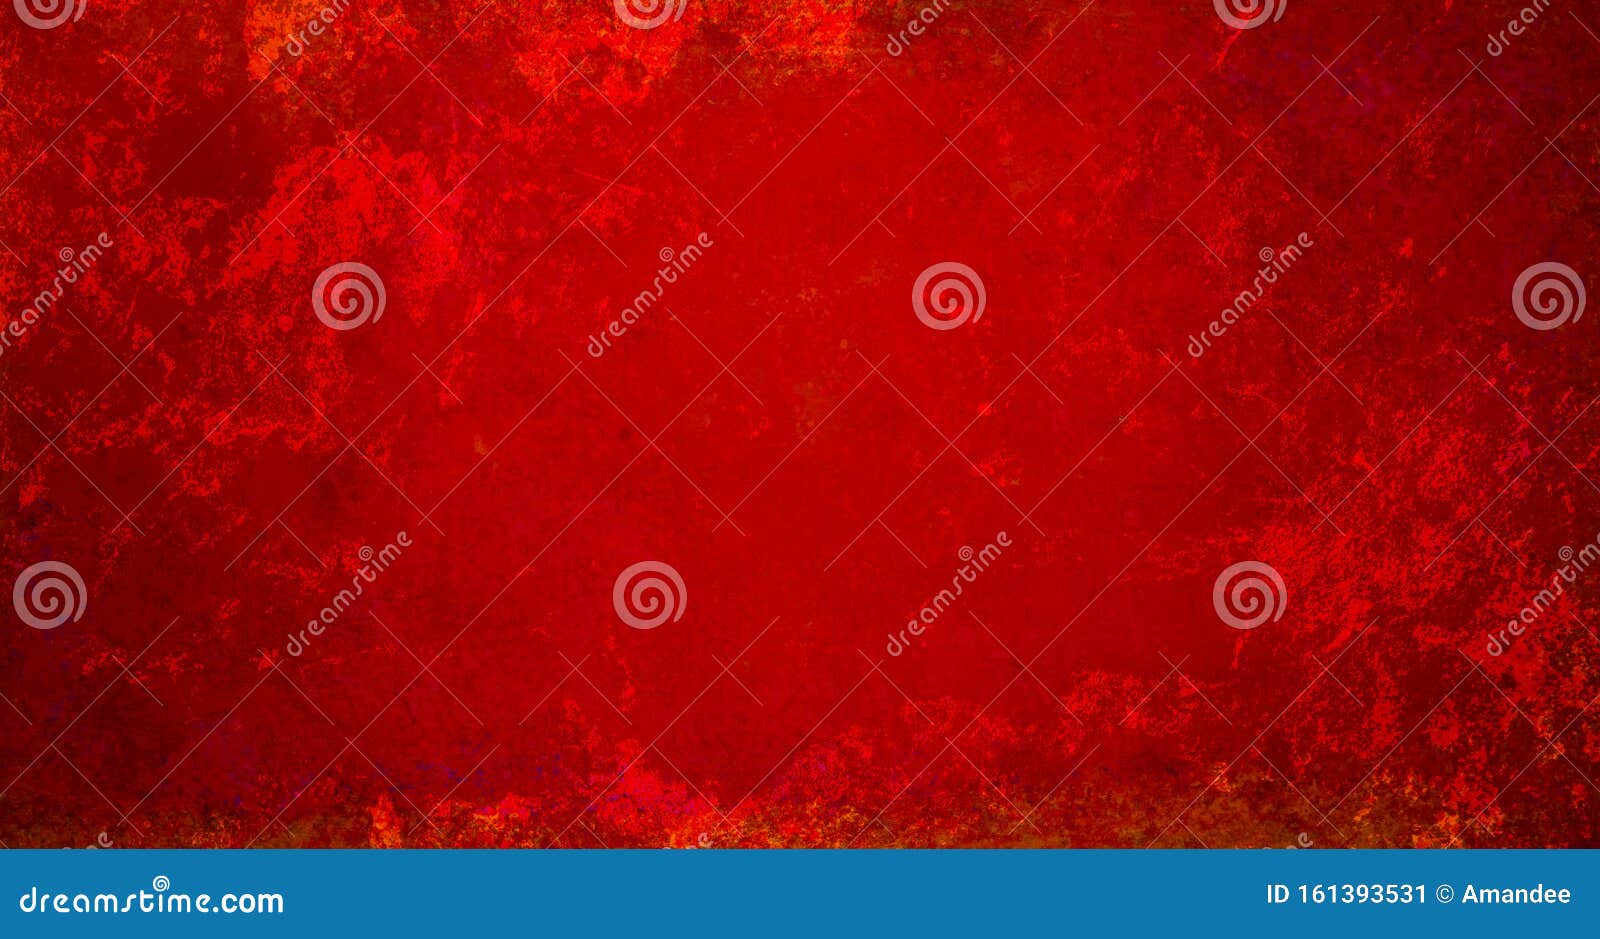 red christmas background paper with vintage distressed texture that is messy scuffed and aged in a classy elegant 